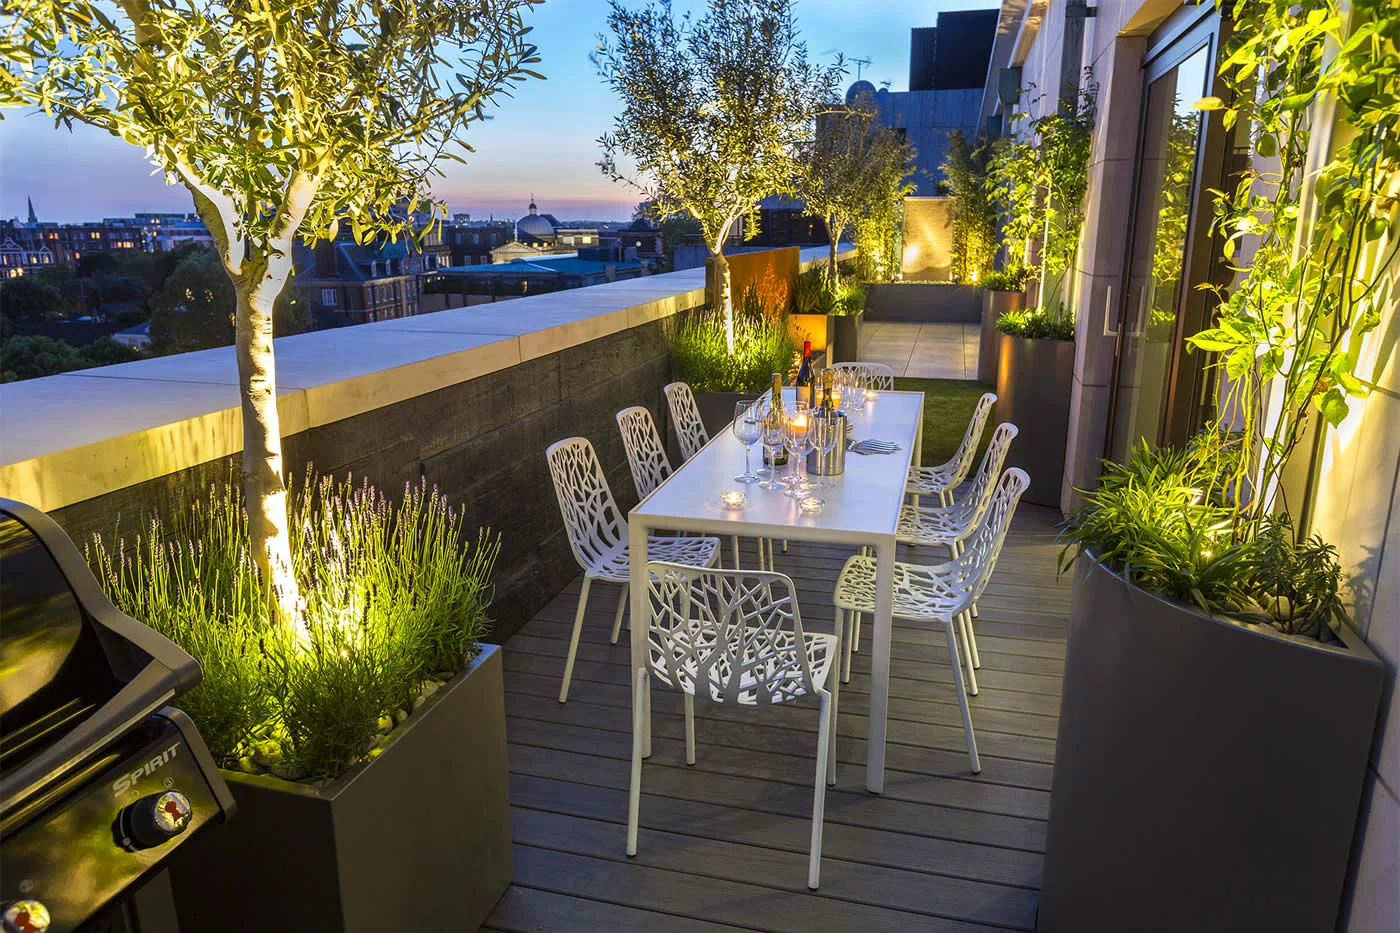 Roof Terrace Design St John's Wood London, by The Garden Buidlers